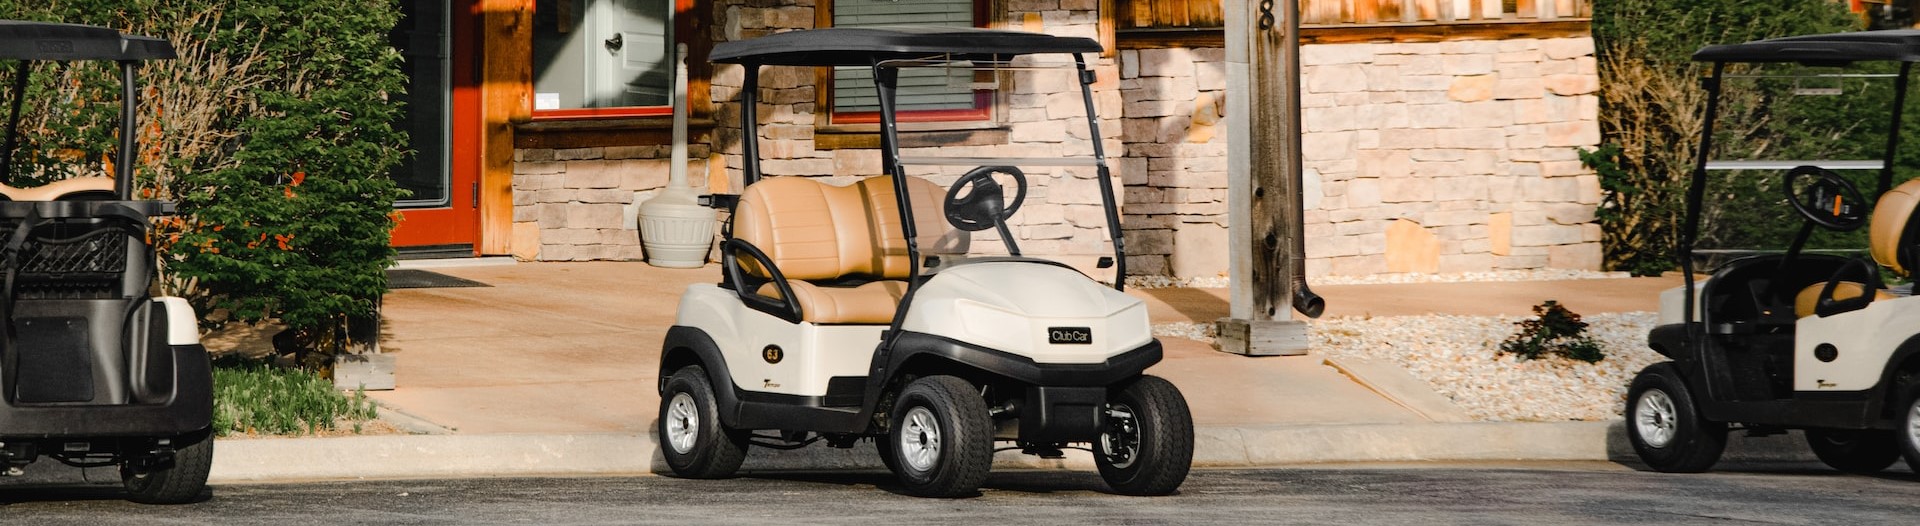 White and Black Golf Cart | Breast Cancer Car Donations